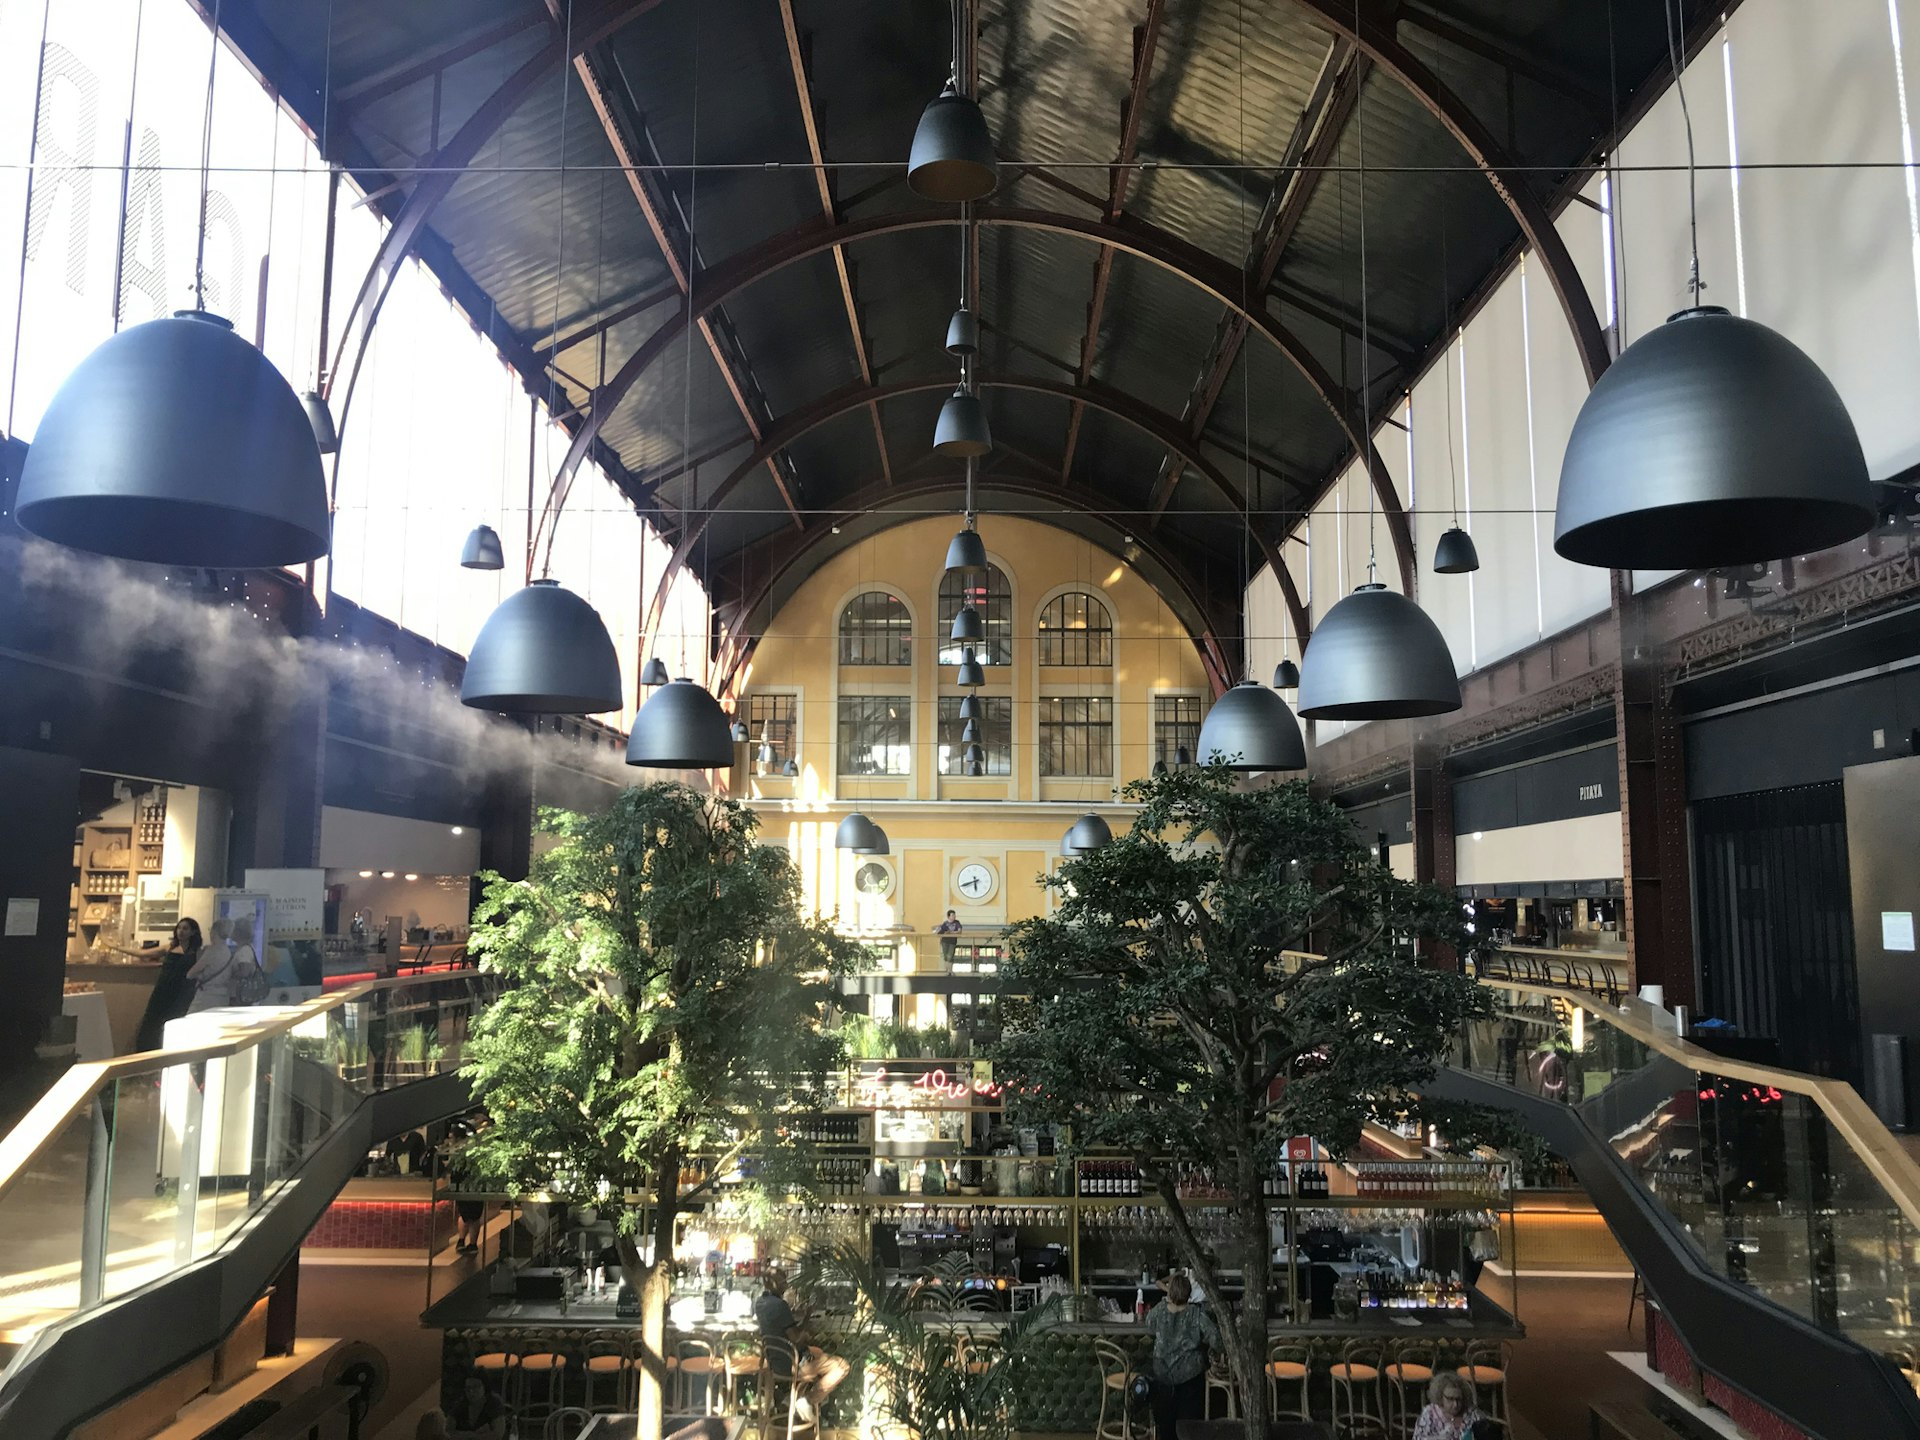 The interior of Gare du Sud station that has been converted to house restaurants and shops